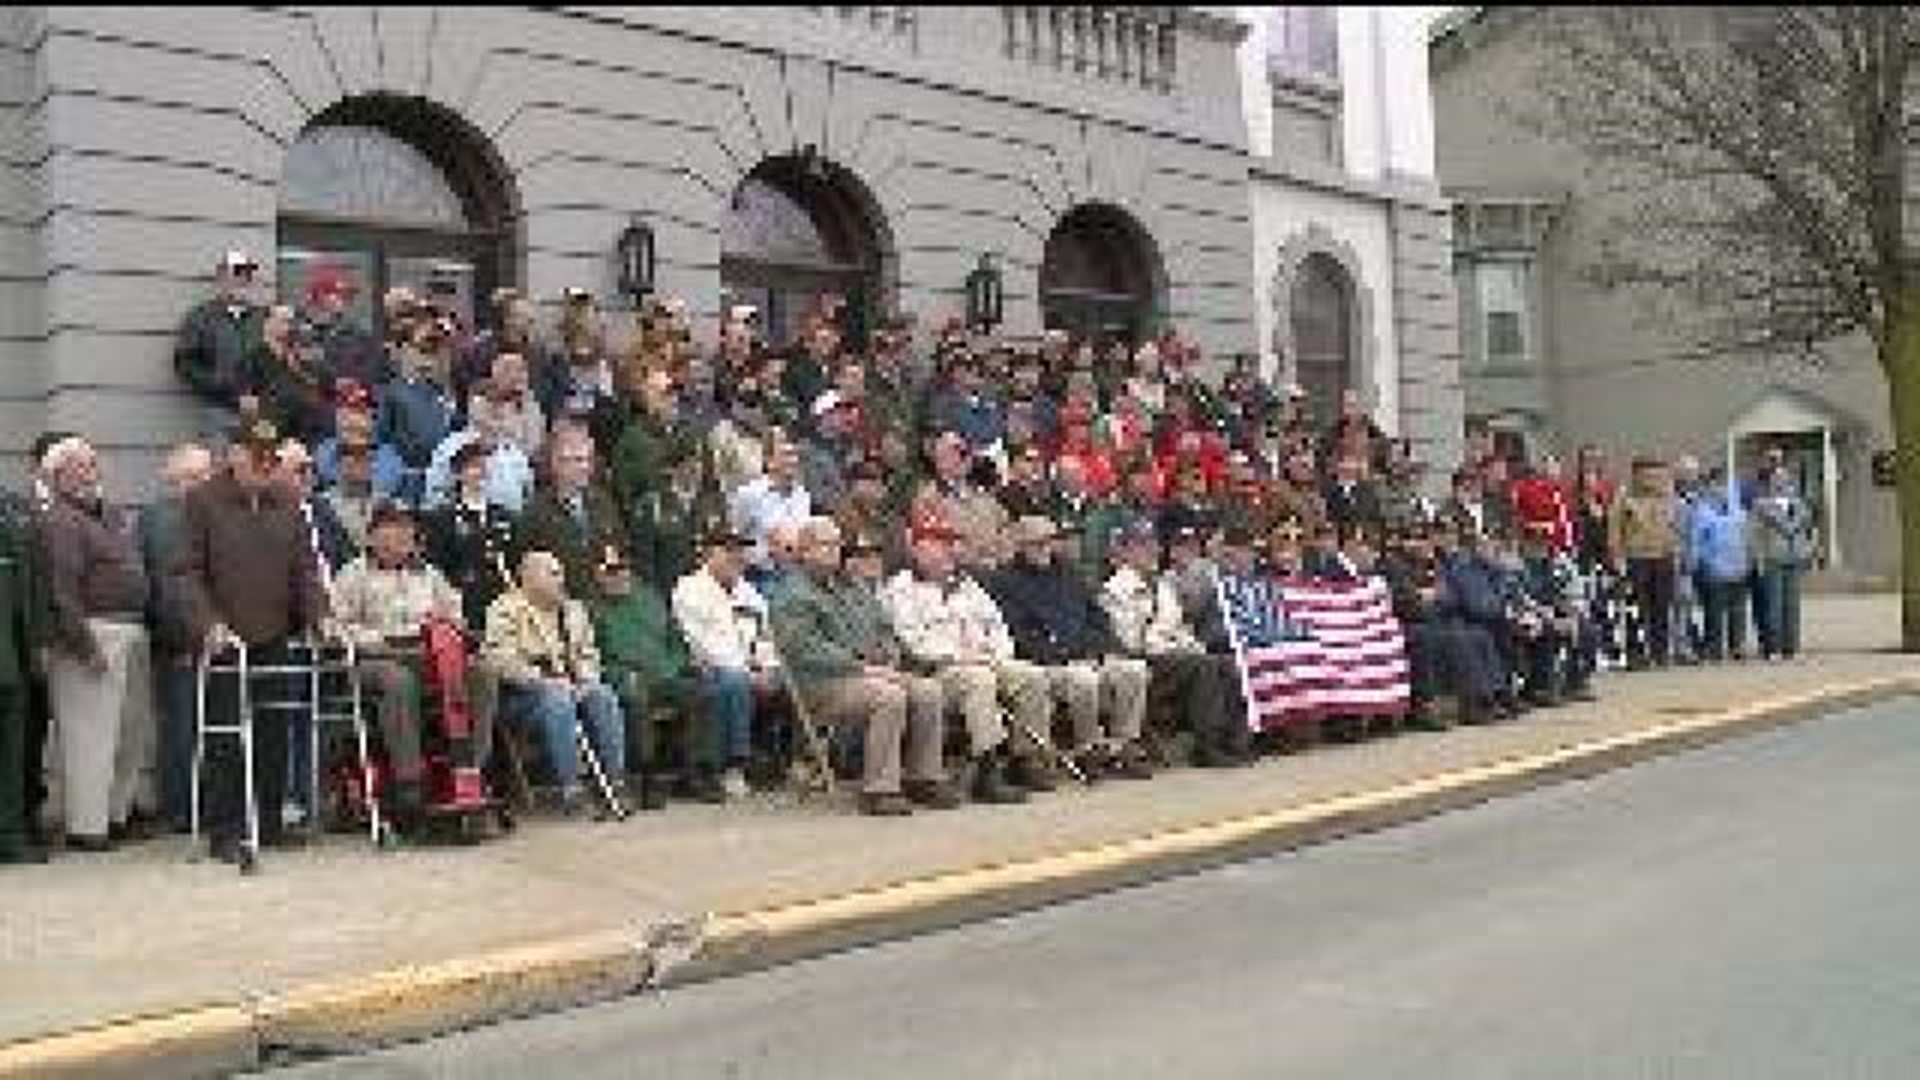 Clinton County Veterans Pose for a Picture